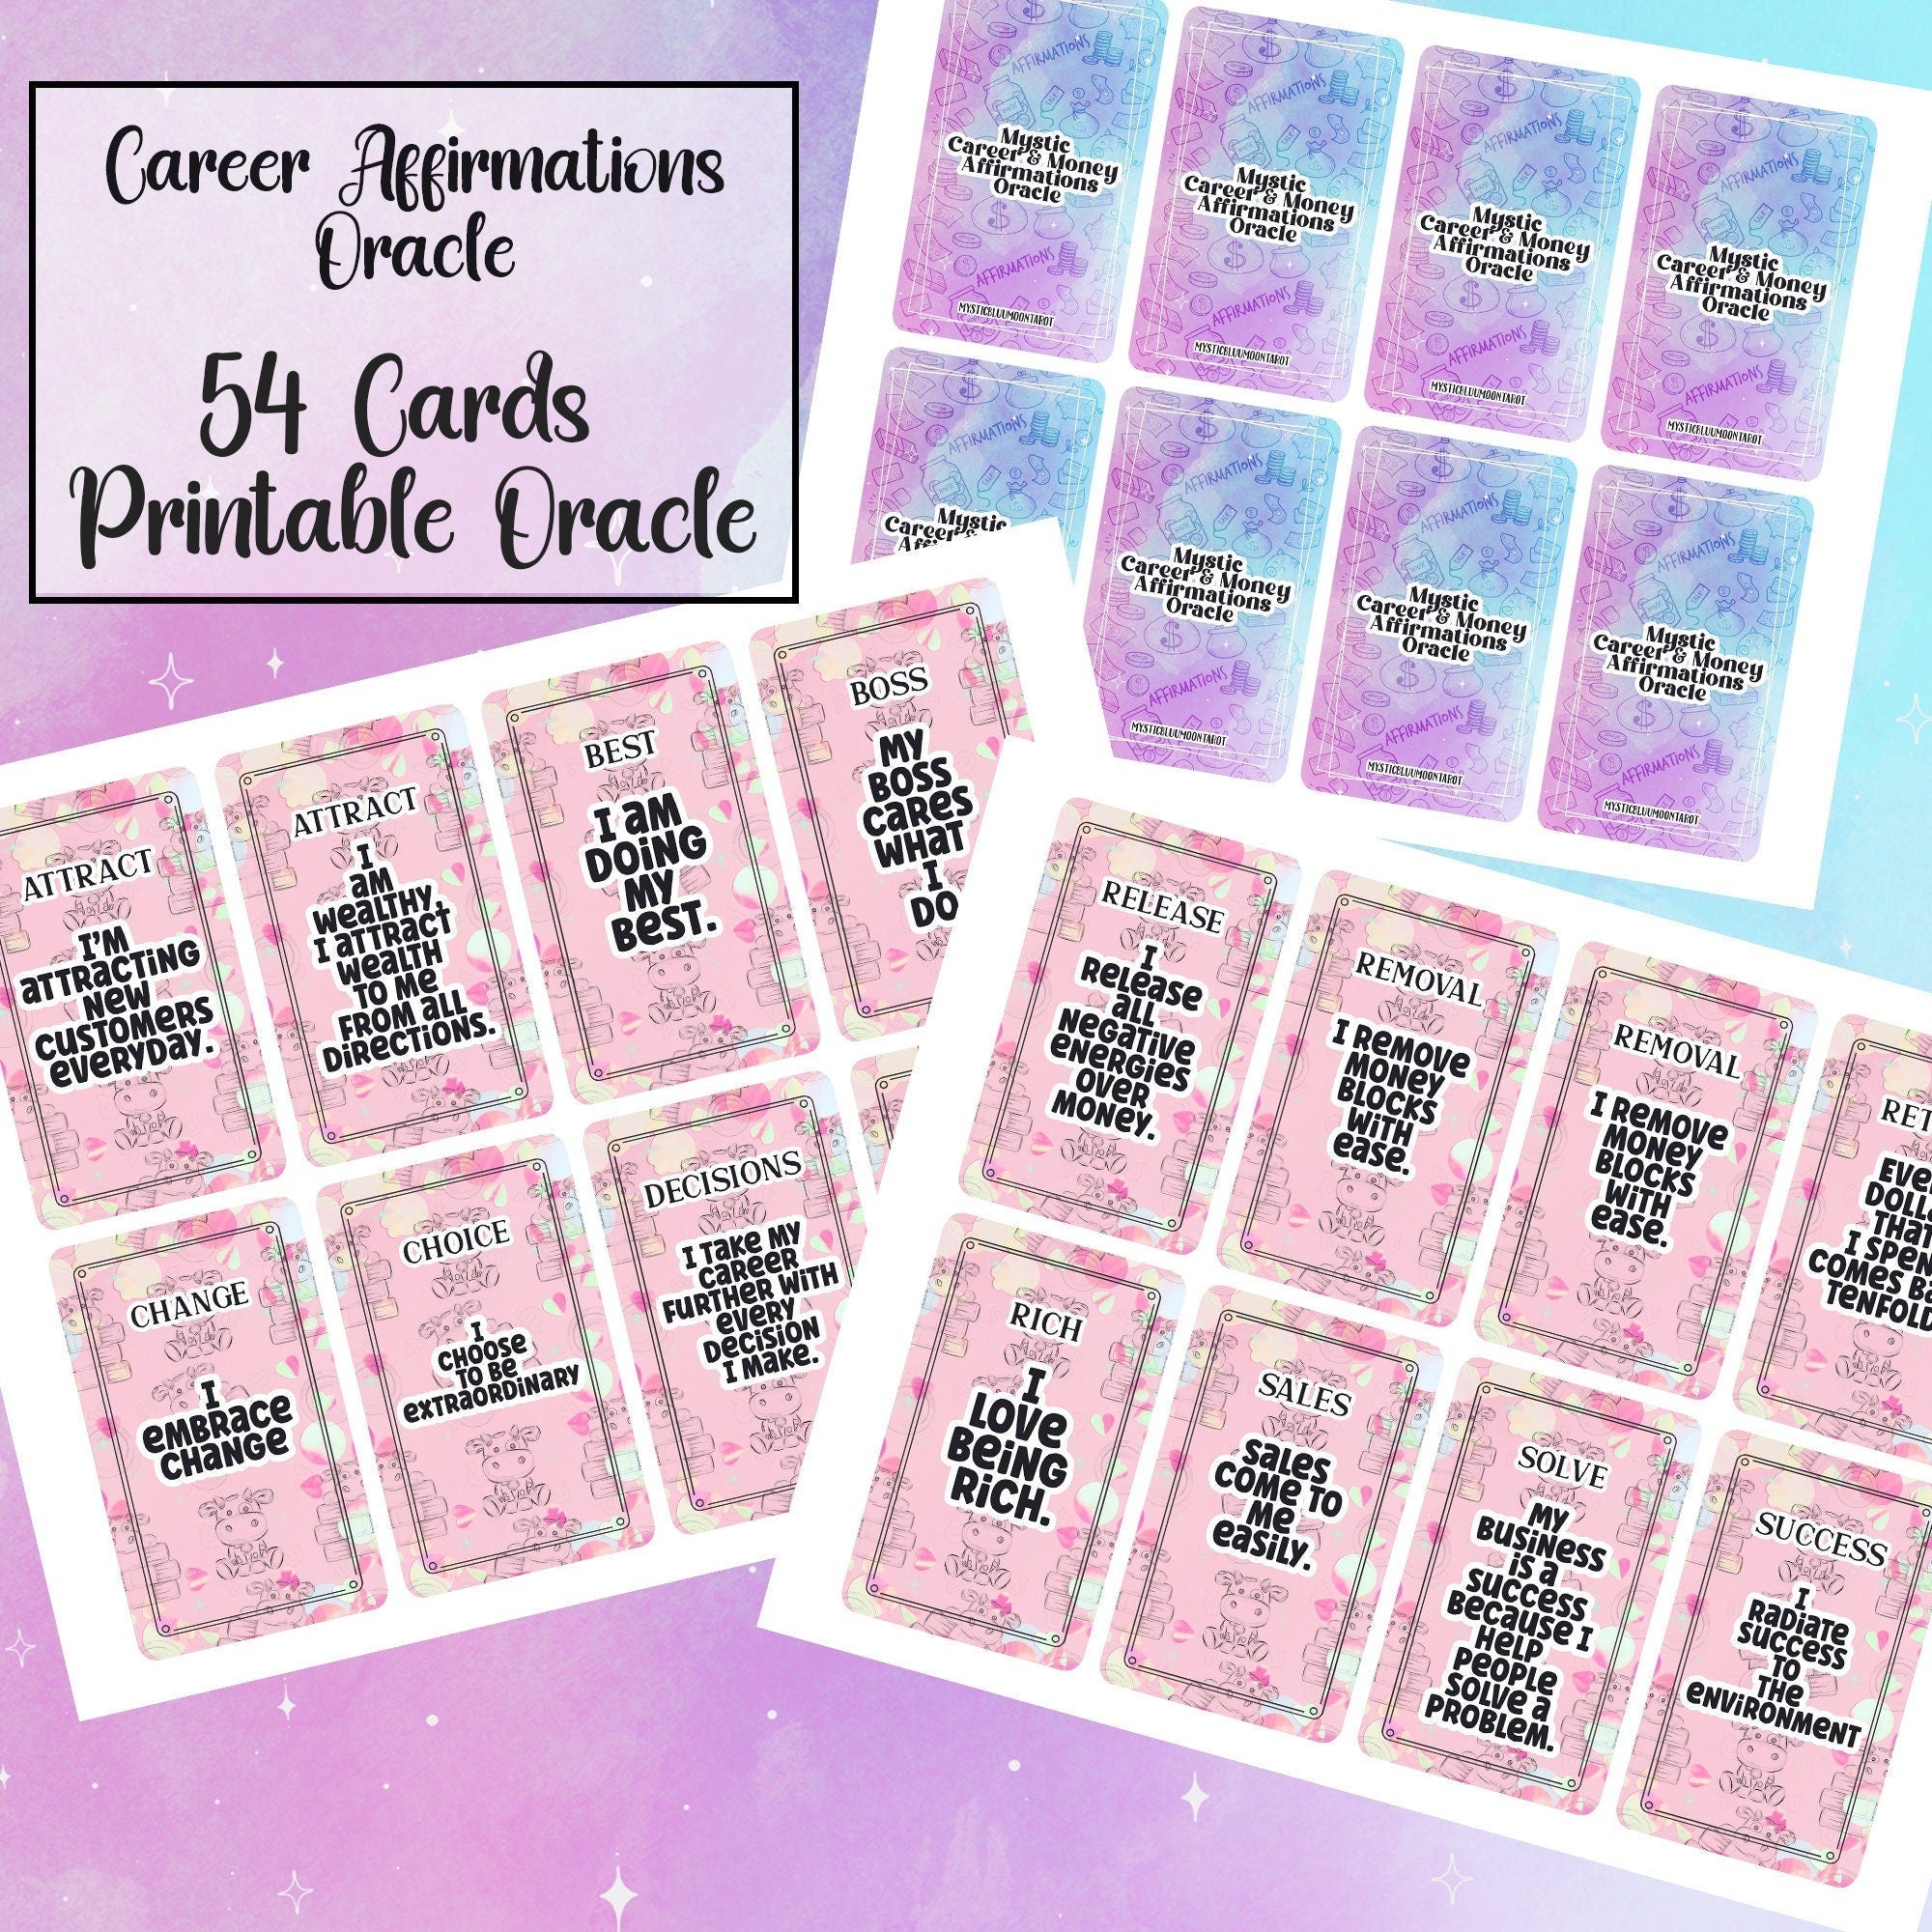 Printable Oracle Deck Career Affirmations - Digital File 54 Oracle Cards - Twin Flame Love Oracle - Tarot - INSTANT DOWNLOAD - MysticBluuMoonTarot